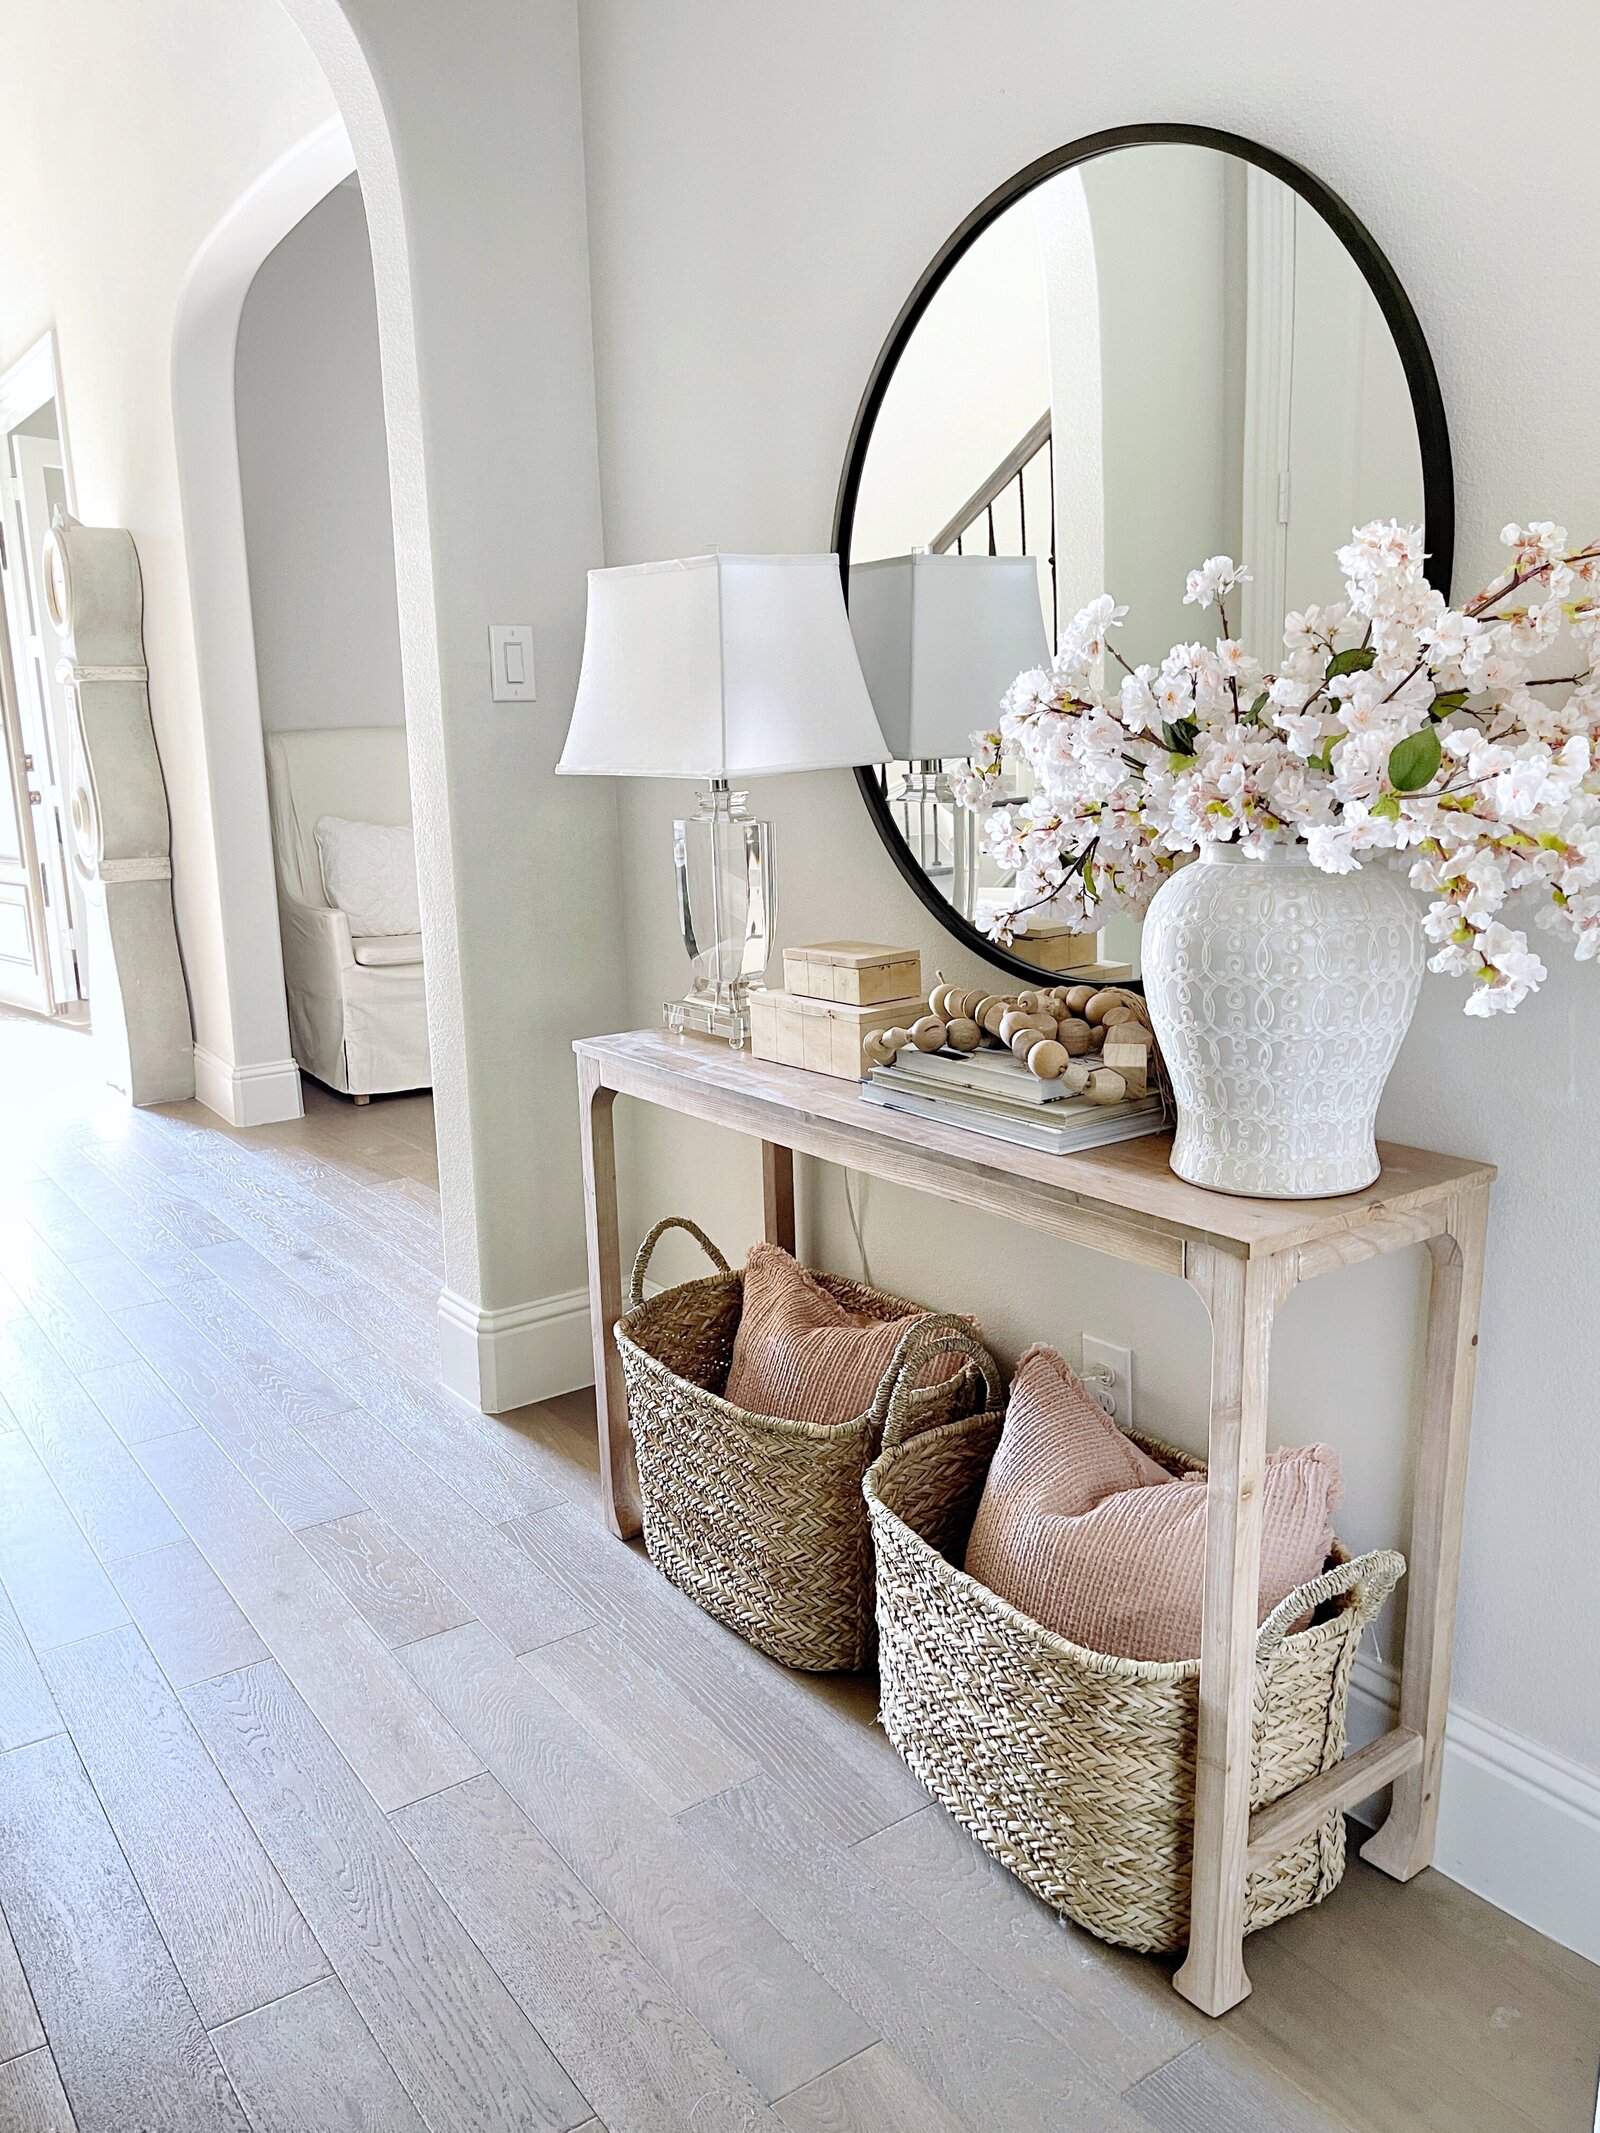 Entryway space featuring a console table decorated